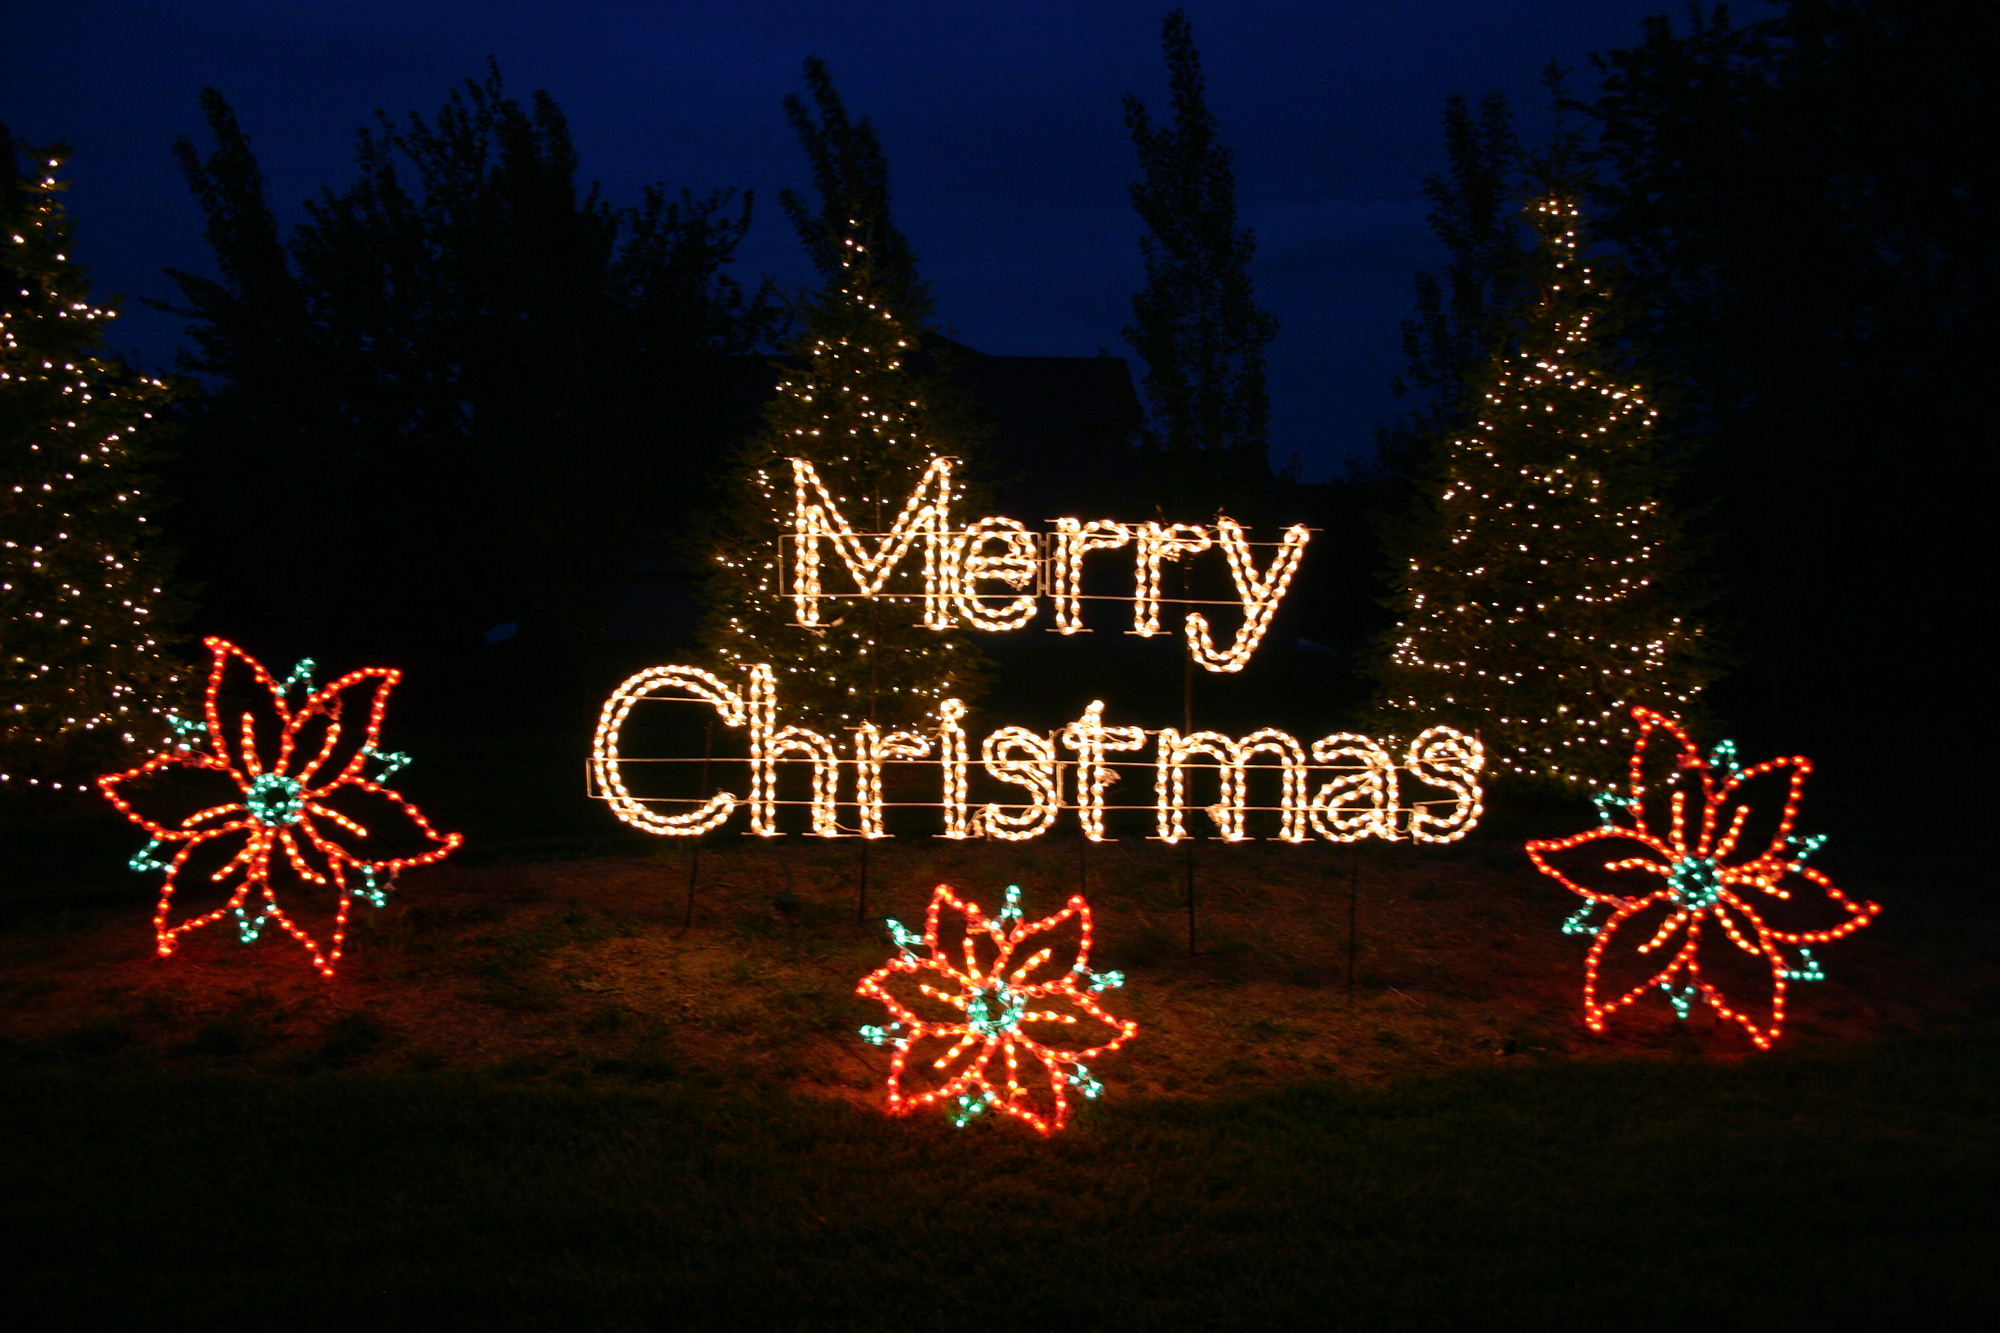 Exterior "Merry Christmas" Light display with pointsettas